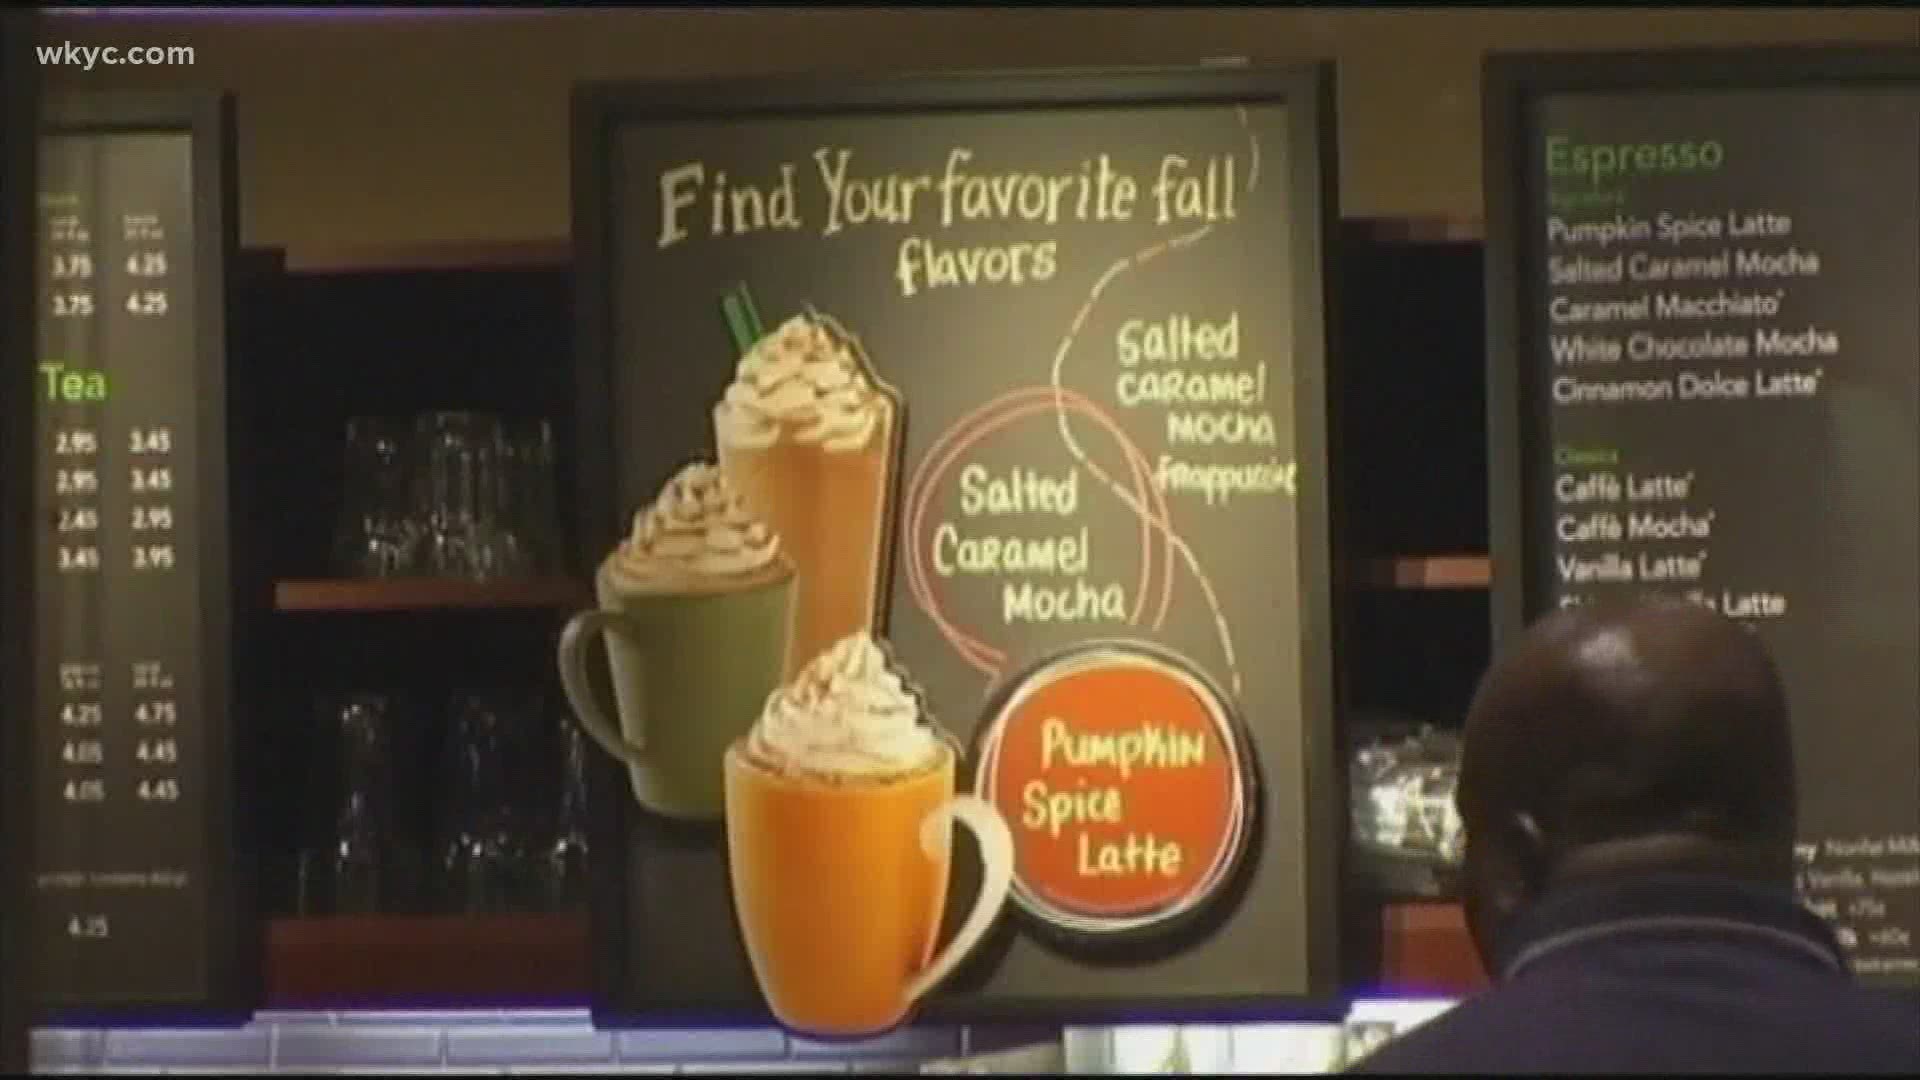 Pumpkin spice latte is back! Do you think it's too early? Here's what some 3News viewers have to say about launching pumpkin spice latte in the summer.